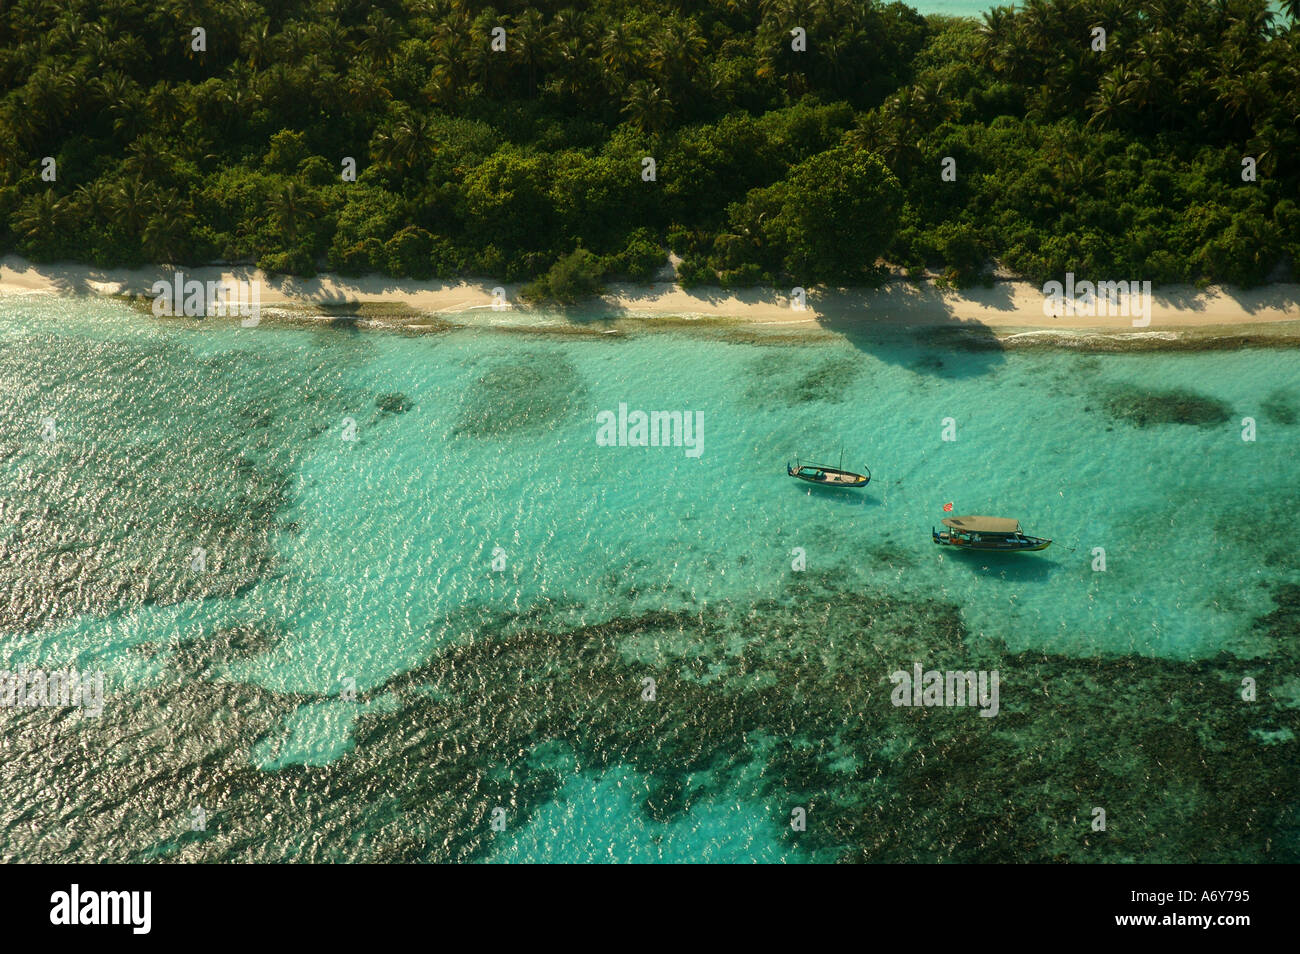 Aerial View of a Maldivian island from air taxi or sea plane en route to resort island Stock Photo